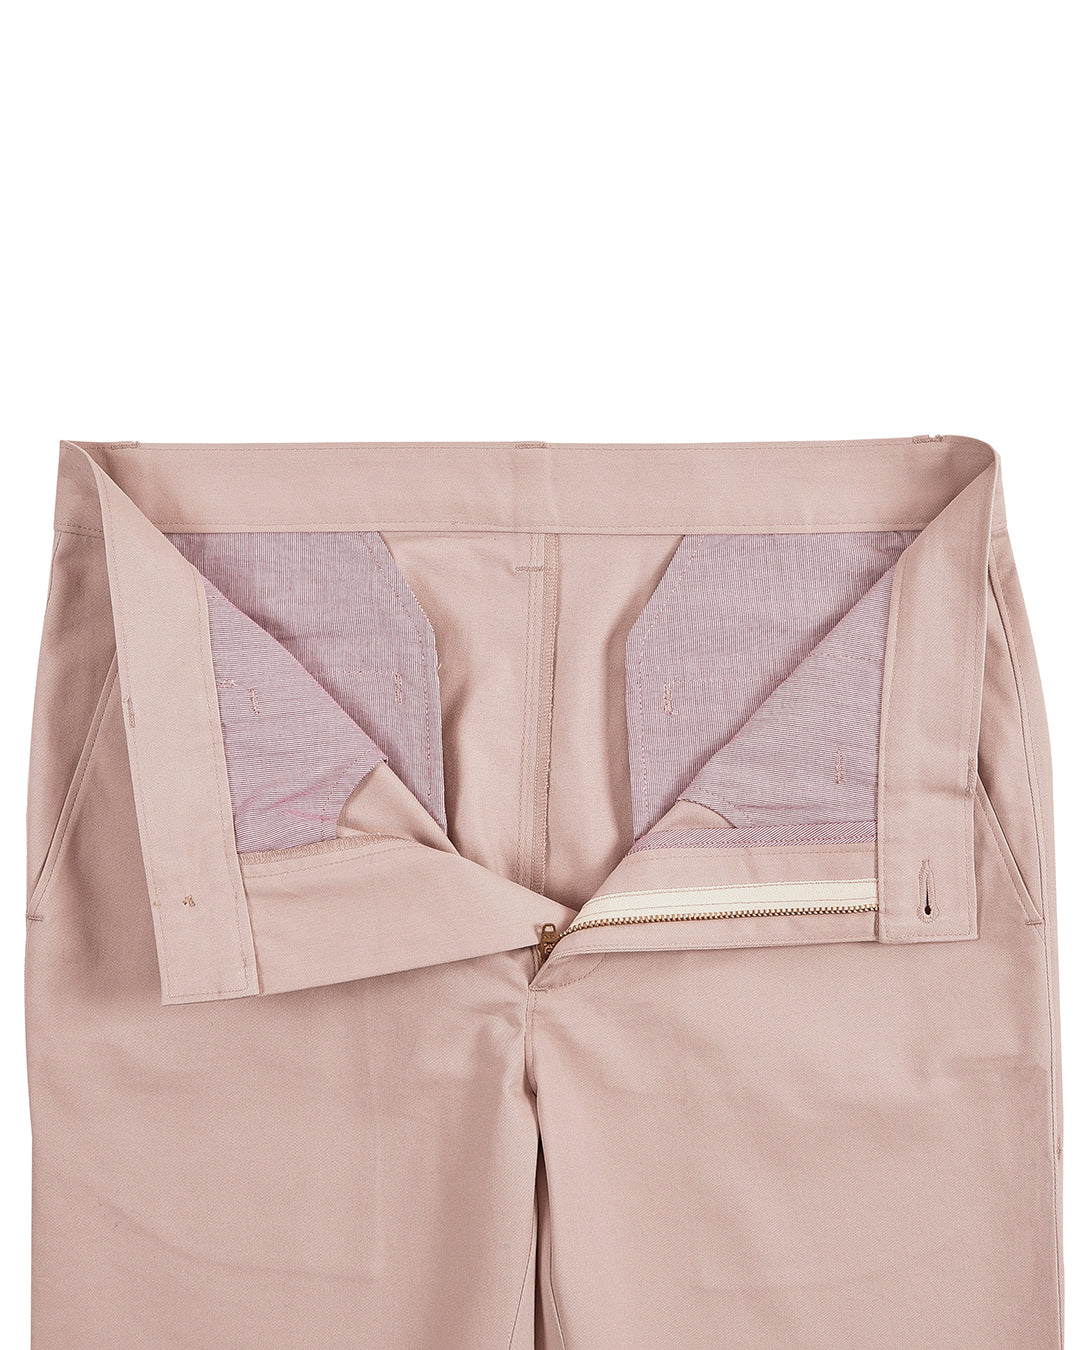 Open front view of custom Genoa Chino pants for men by Luxire in pale pink